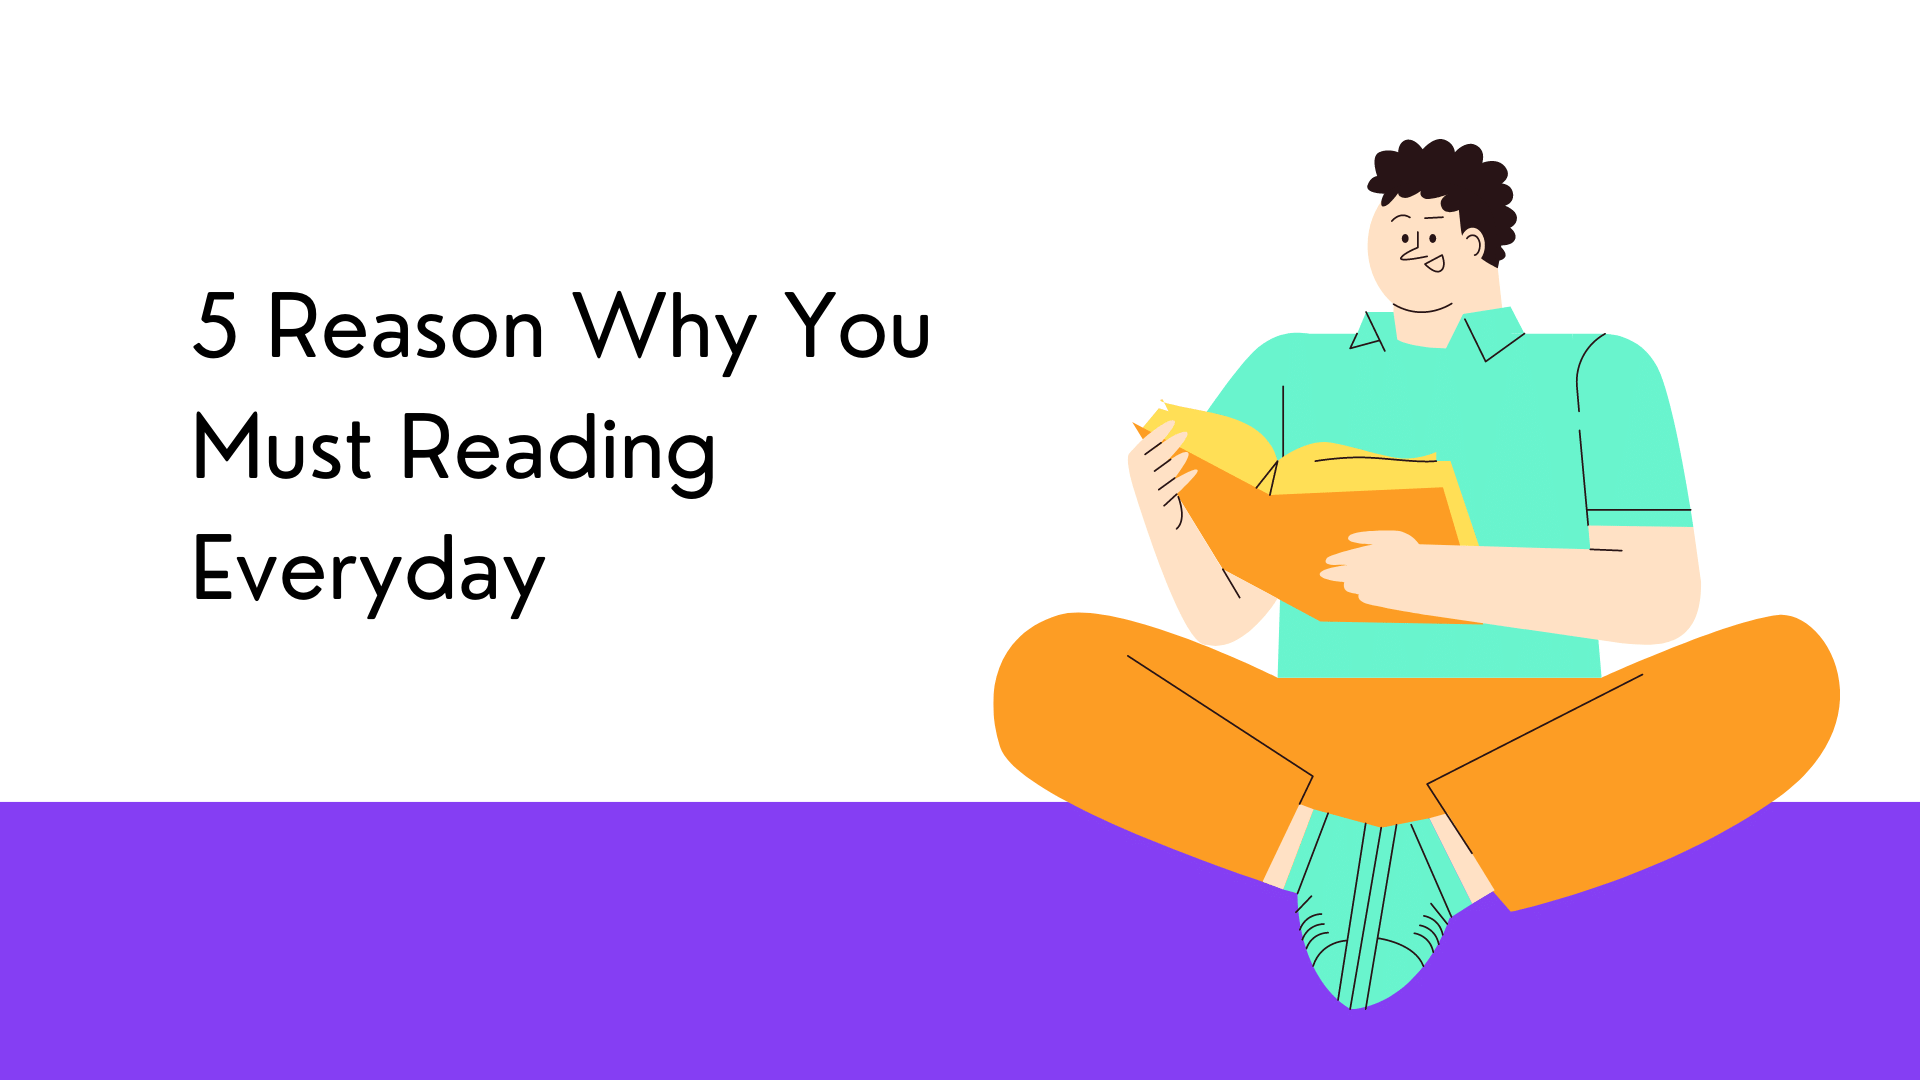 5 Reason Why You Must Reading Everyday